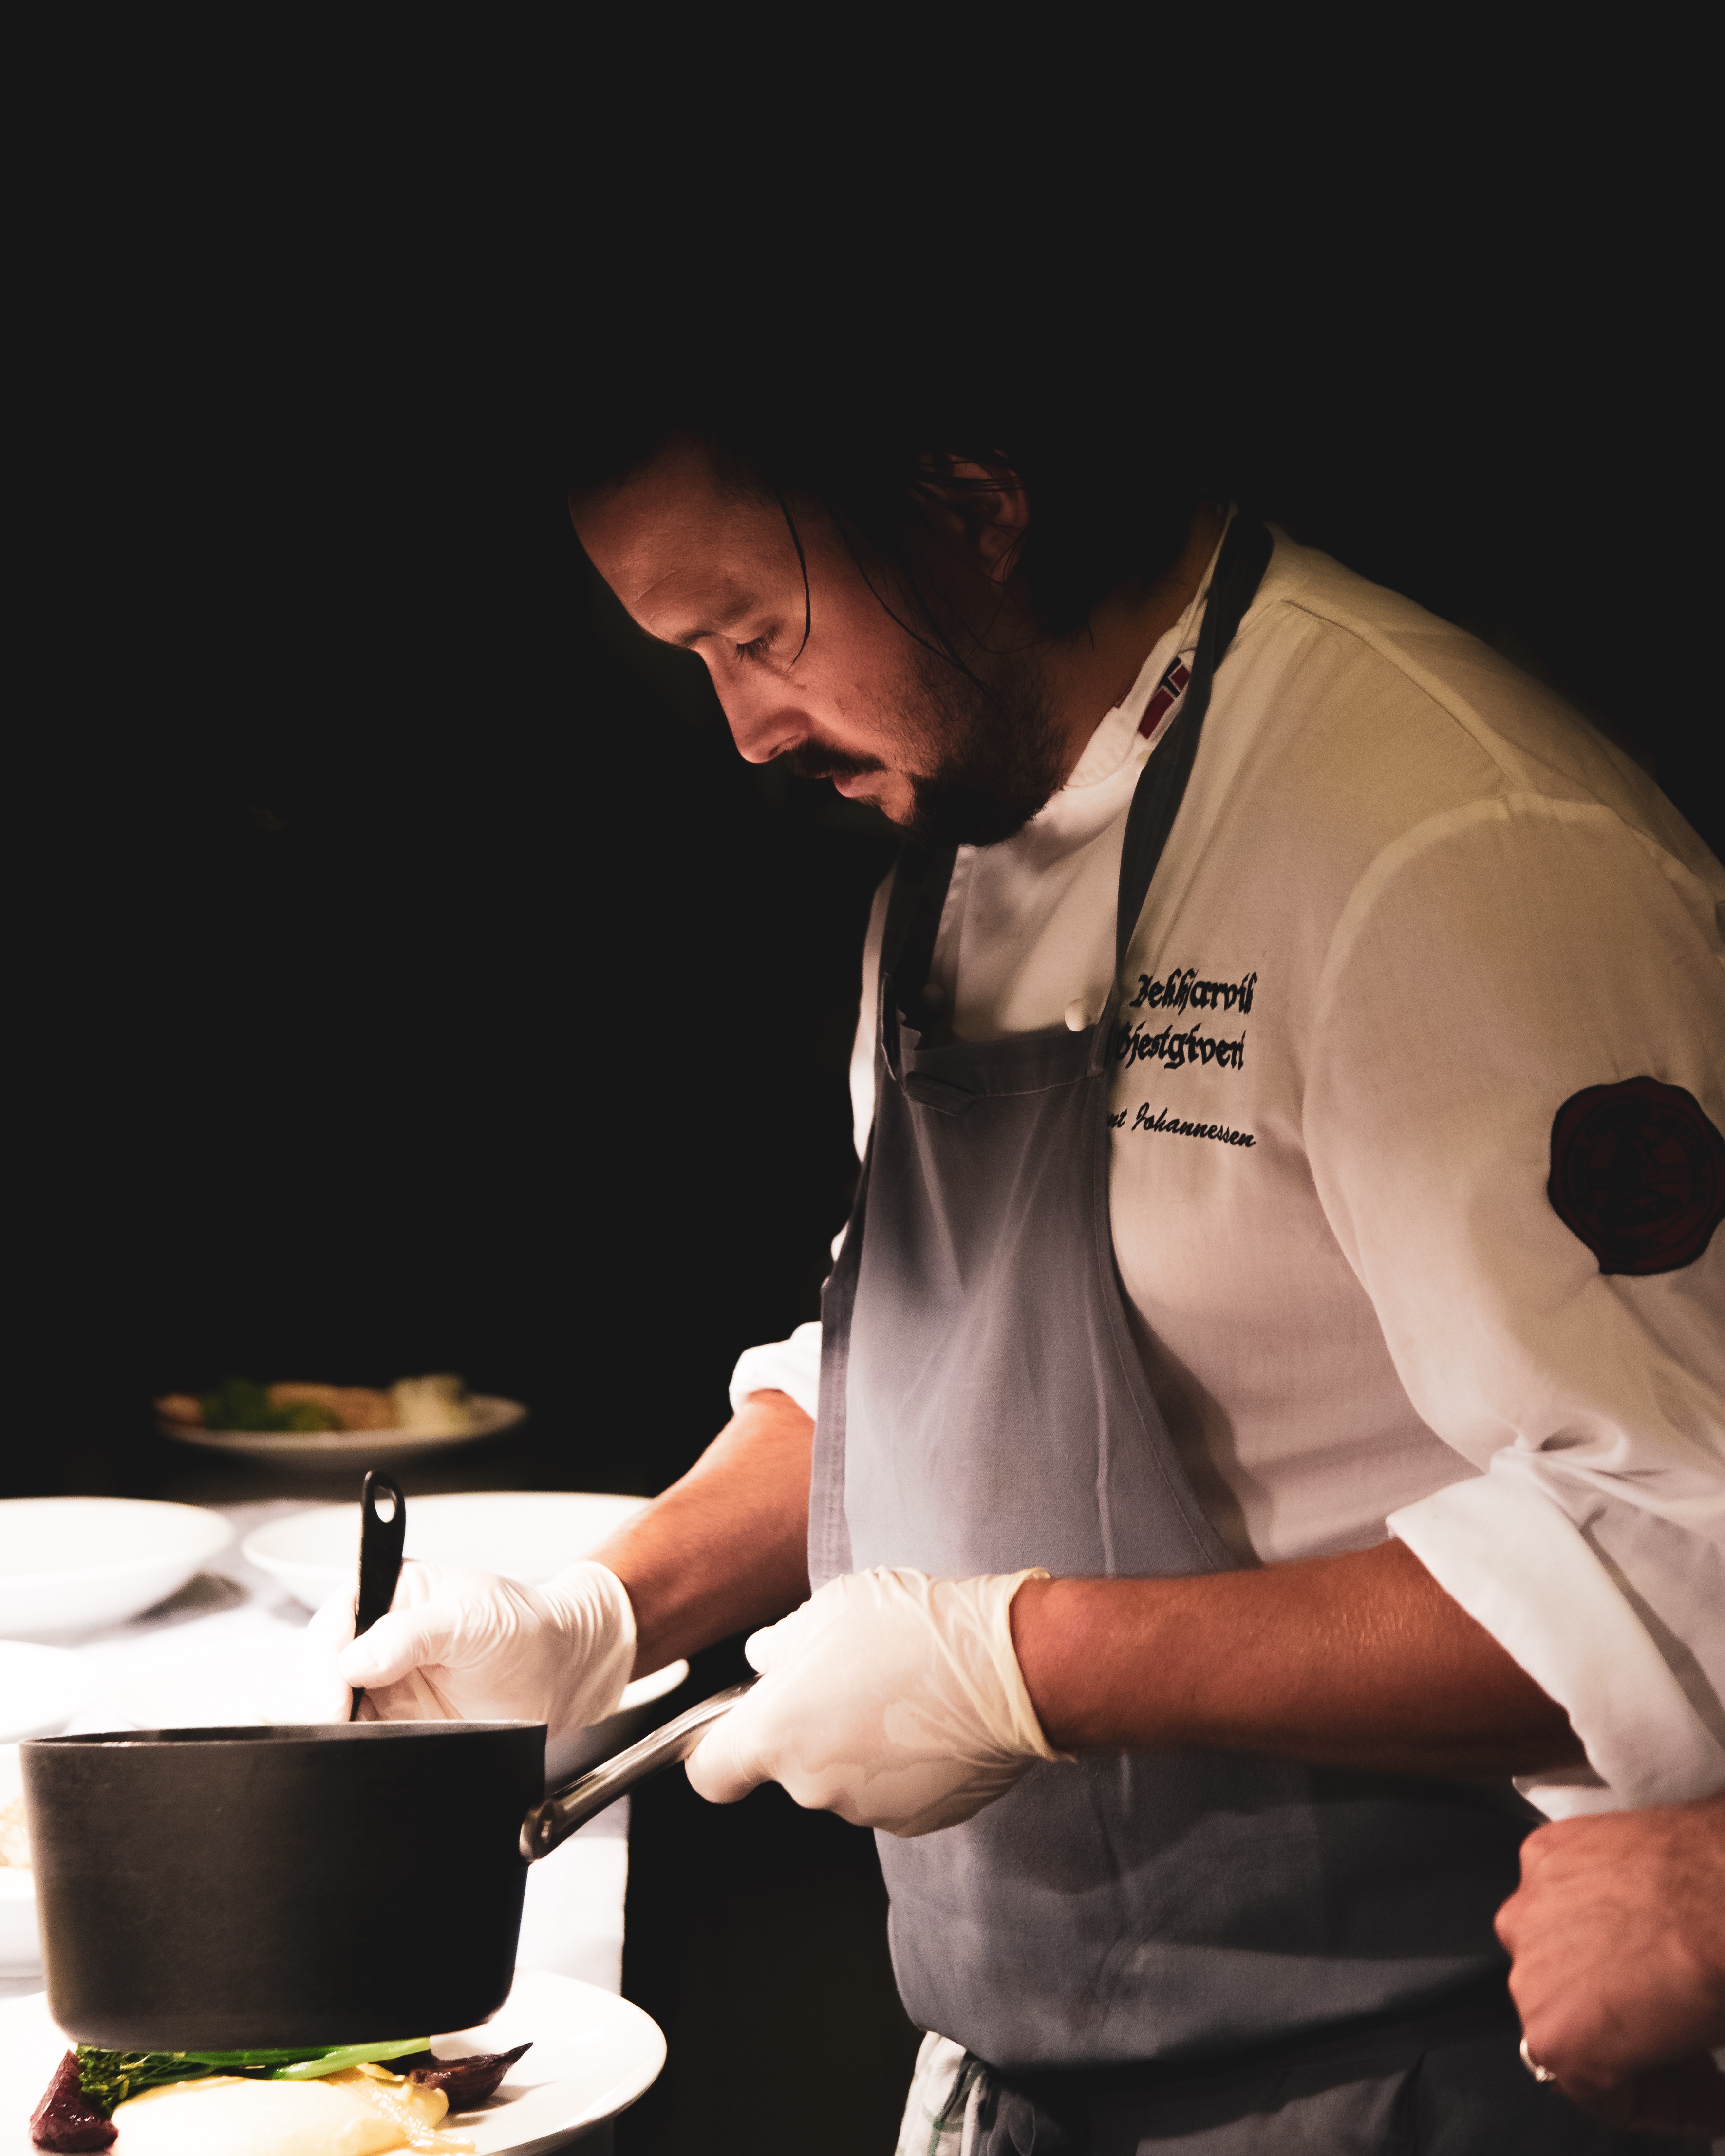 An image capturing a chef on a white uniform and black apron on a dark room